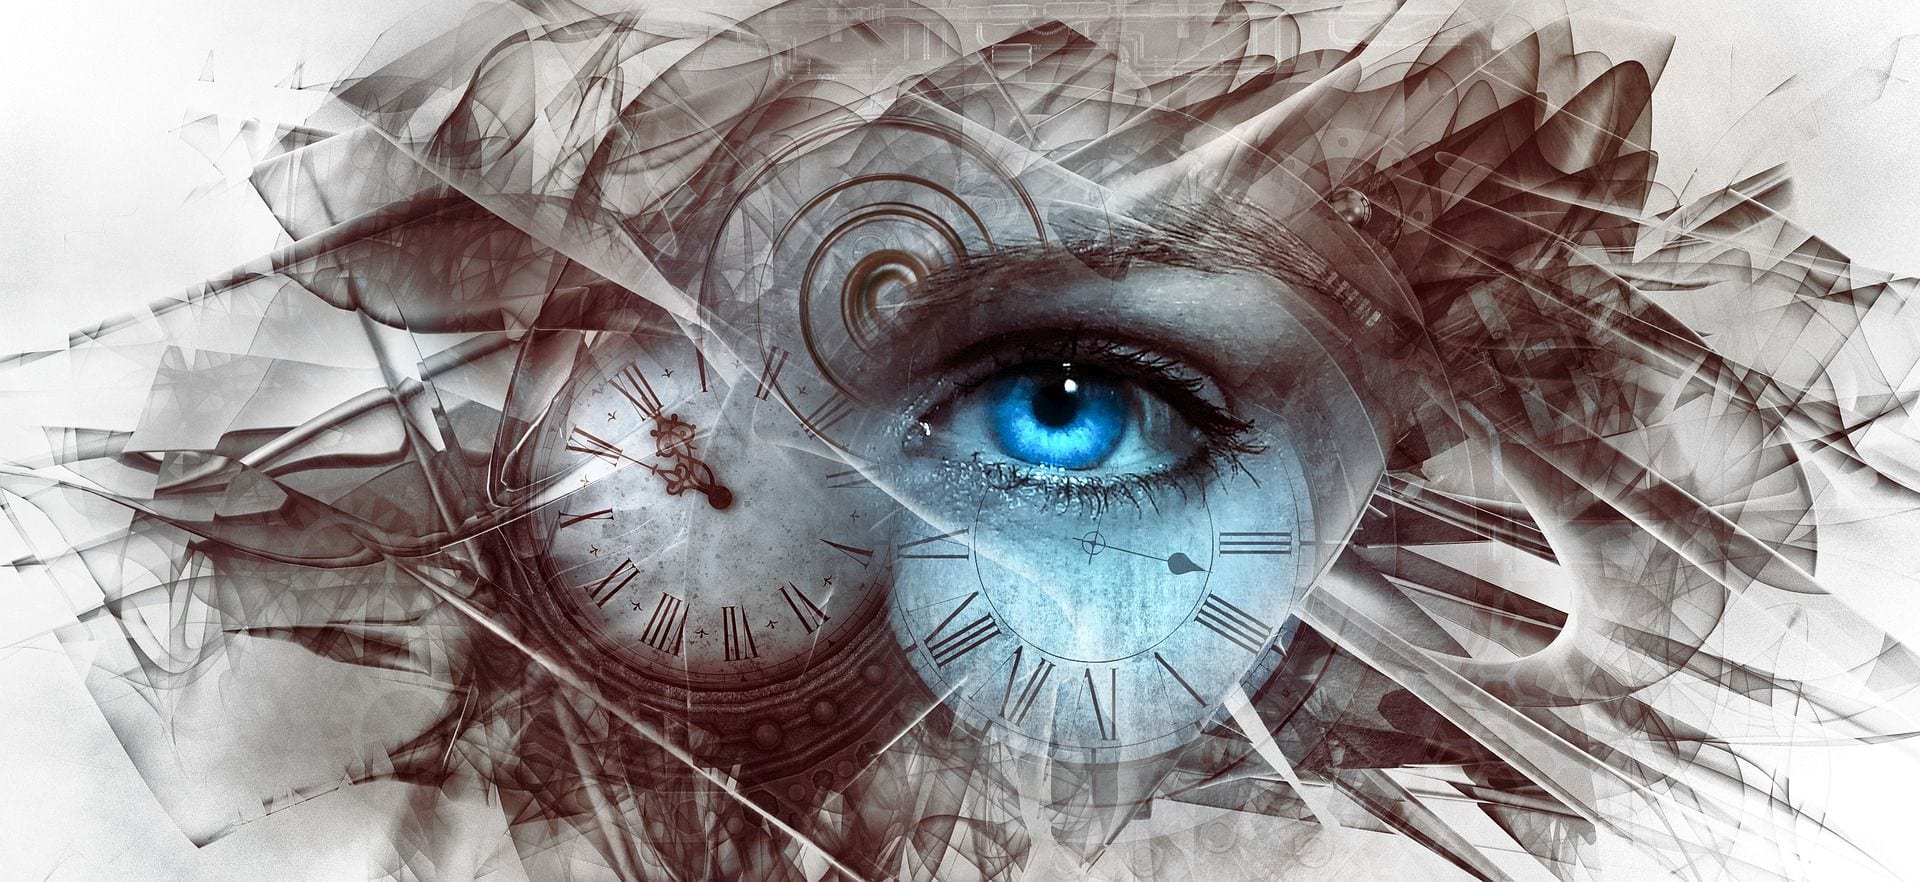 Abstract art depicting a human eye in the center of distorted clocks inferring a link to the alter conscious state of mind.